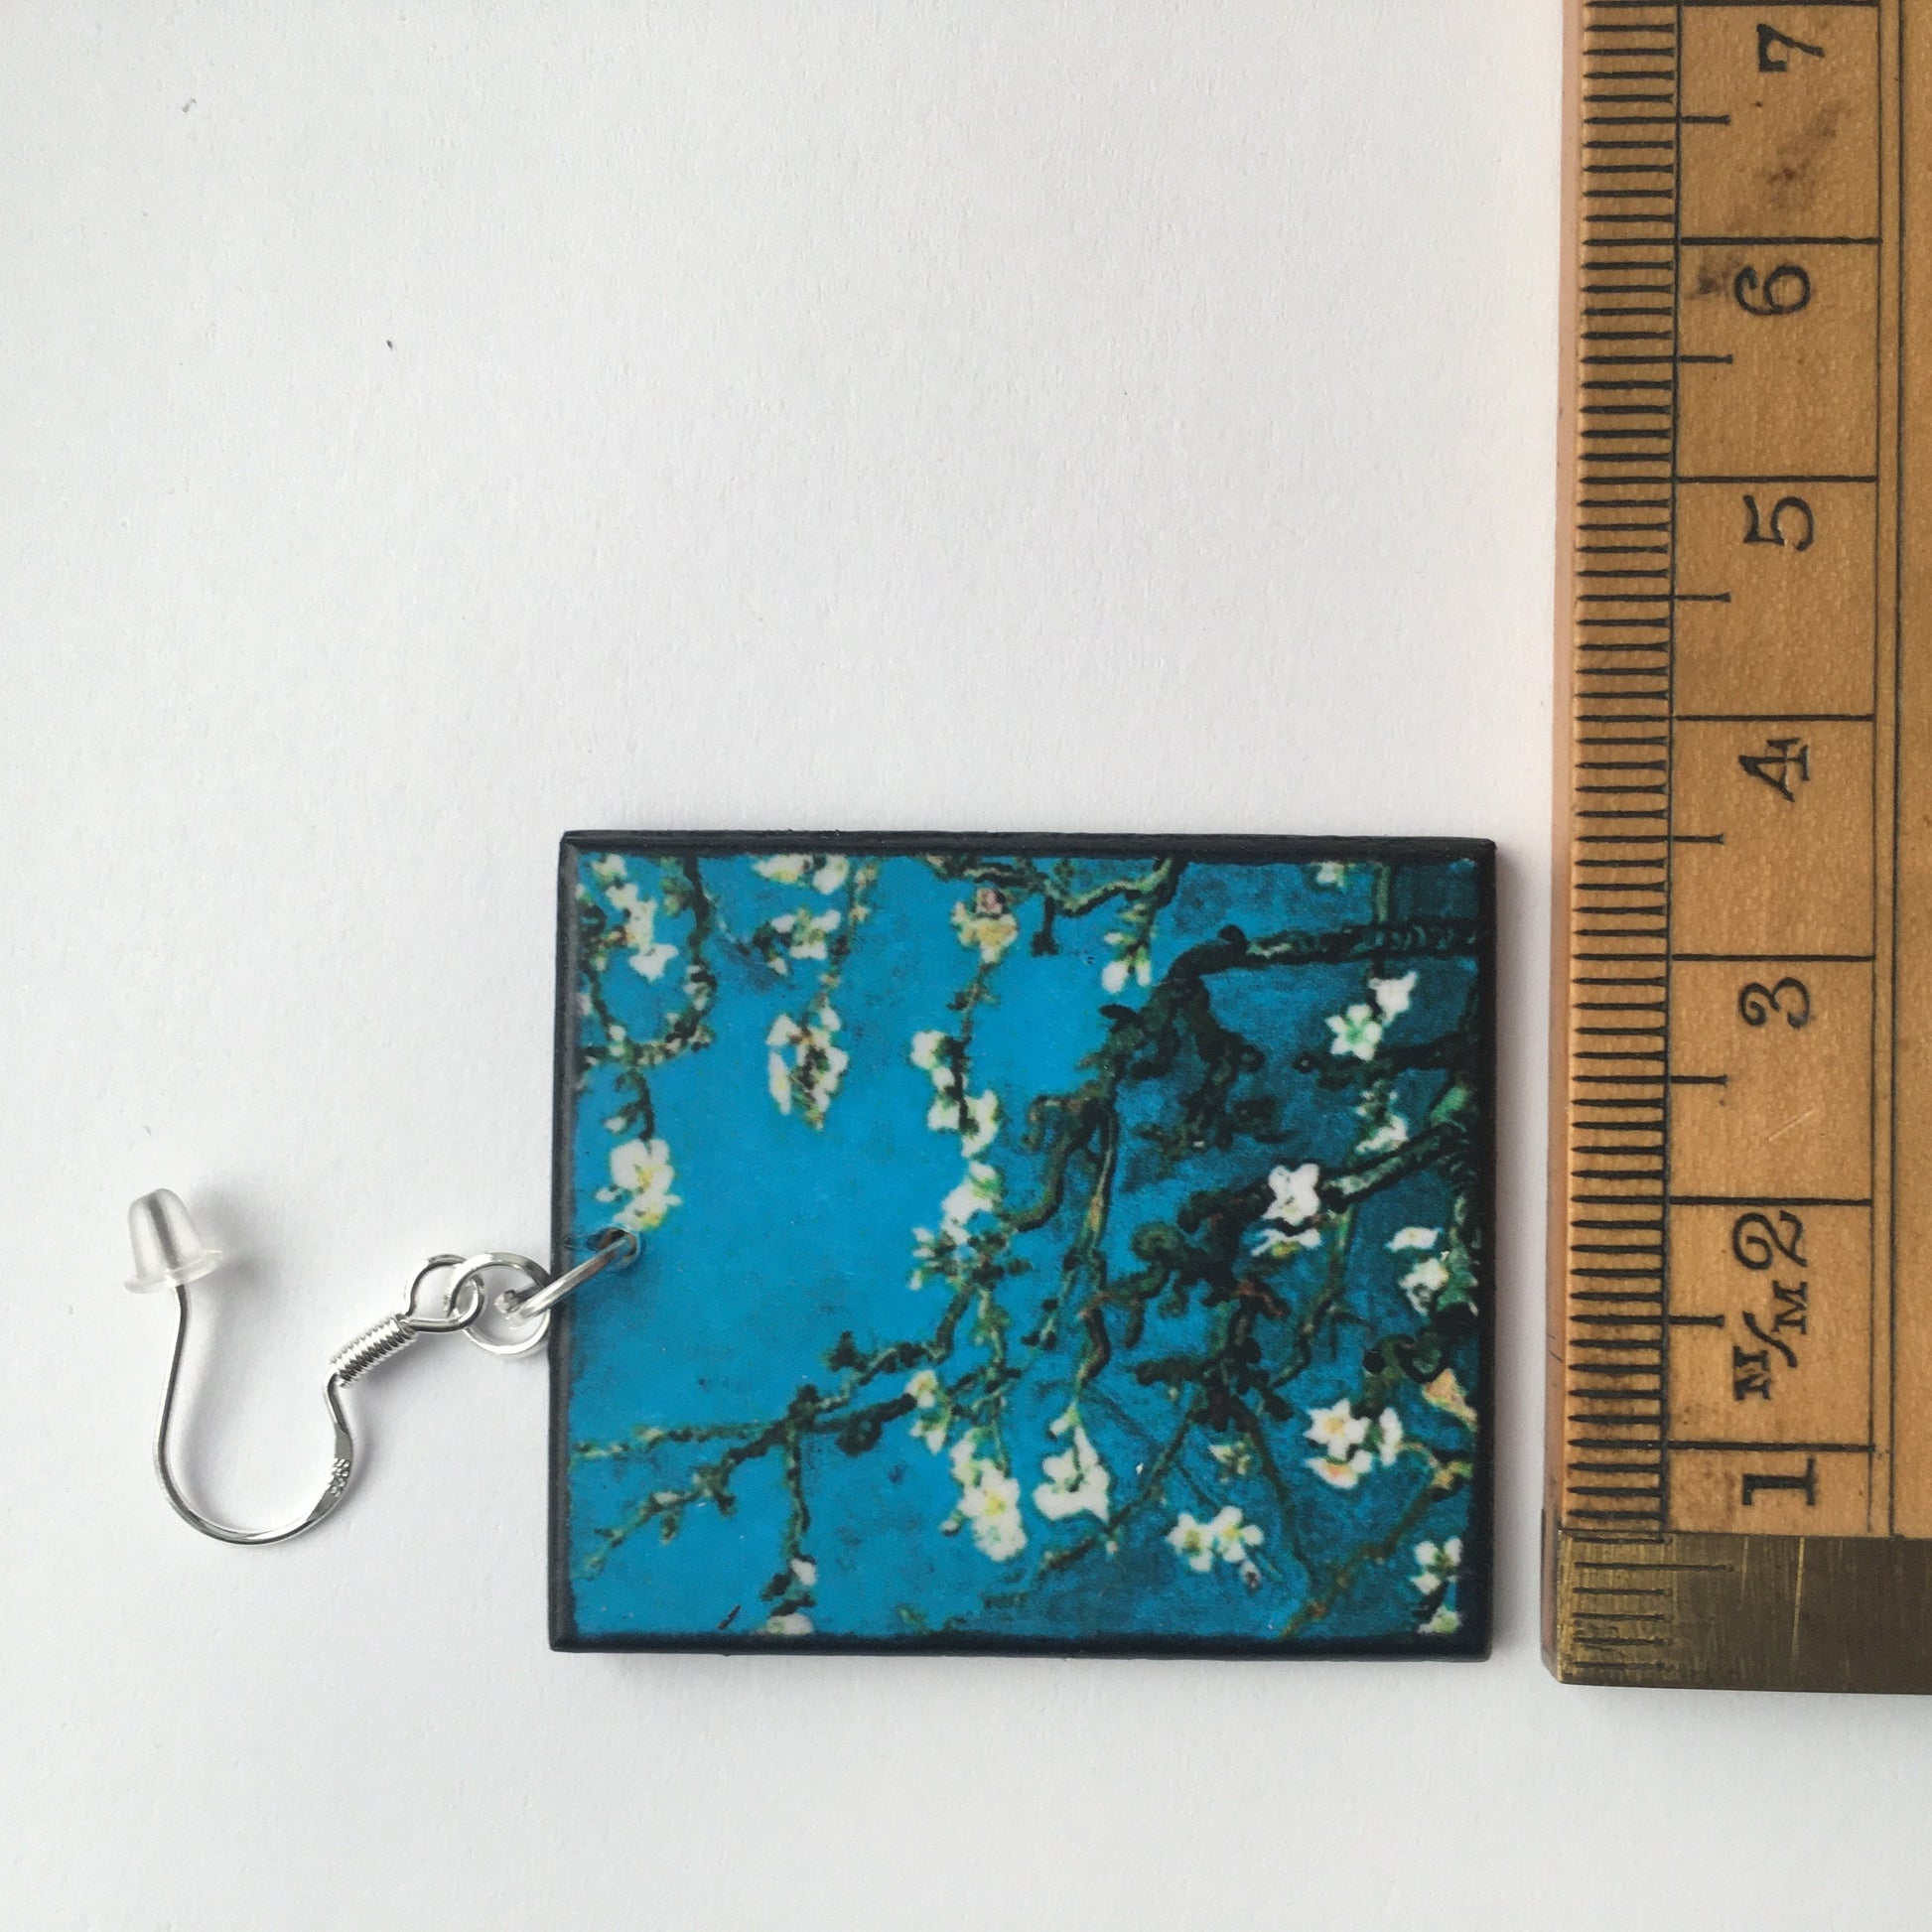 Sustainable wood earrings 4cm x 3.5 cm x 2/3 mm approx. Sterling silver 925 hooks.  The Van Gogh artsy earrings are inspired by the masterpiece "Almond Blossom" where the artist painted one of his favourite subjects  large flowering branches against a blue sky. The almond tree blooms is a symbol of new life, this painting was a gift for his brother Theo and his wife who had a son.  Vincent Van Gogh was inspired by Japanese prints.